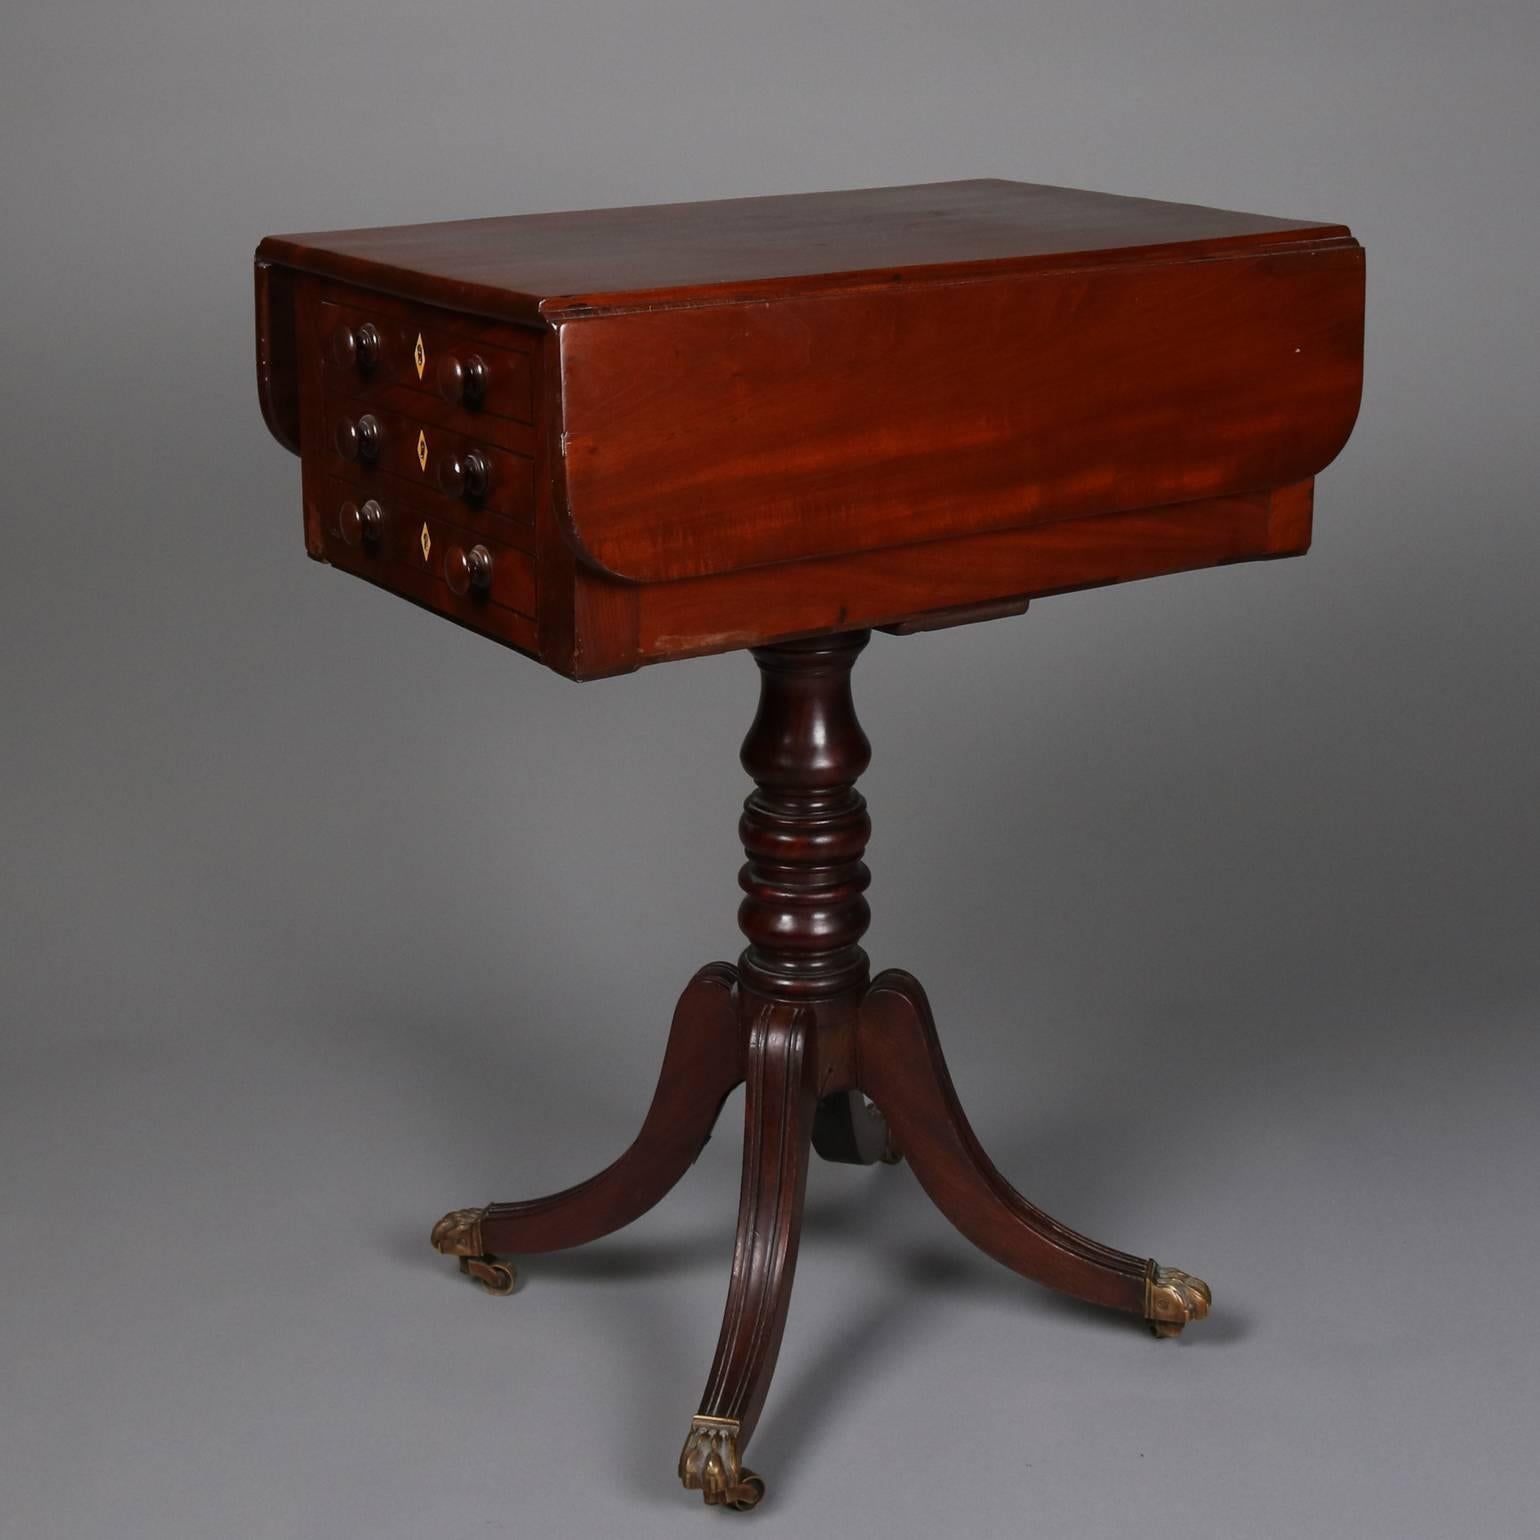 Antique flame mahogany Duncan Phyfe School sewing Stand features three drawer case with inlaid bone escutcheons and drop leaf top above reeded splayed legs capped with cast bronze claw feet and casters, circa 1820

Measures: 28